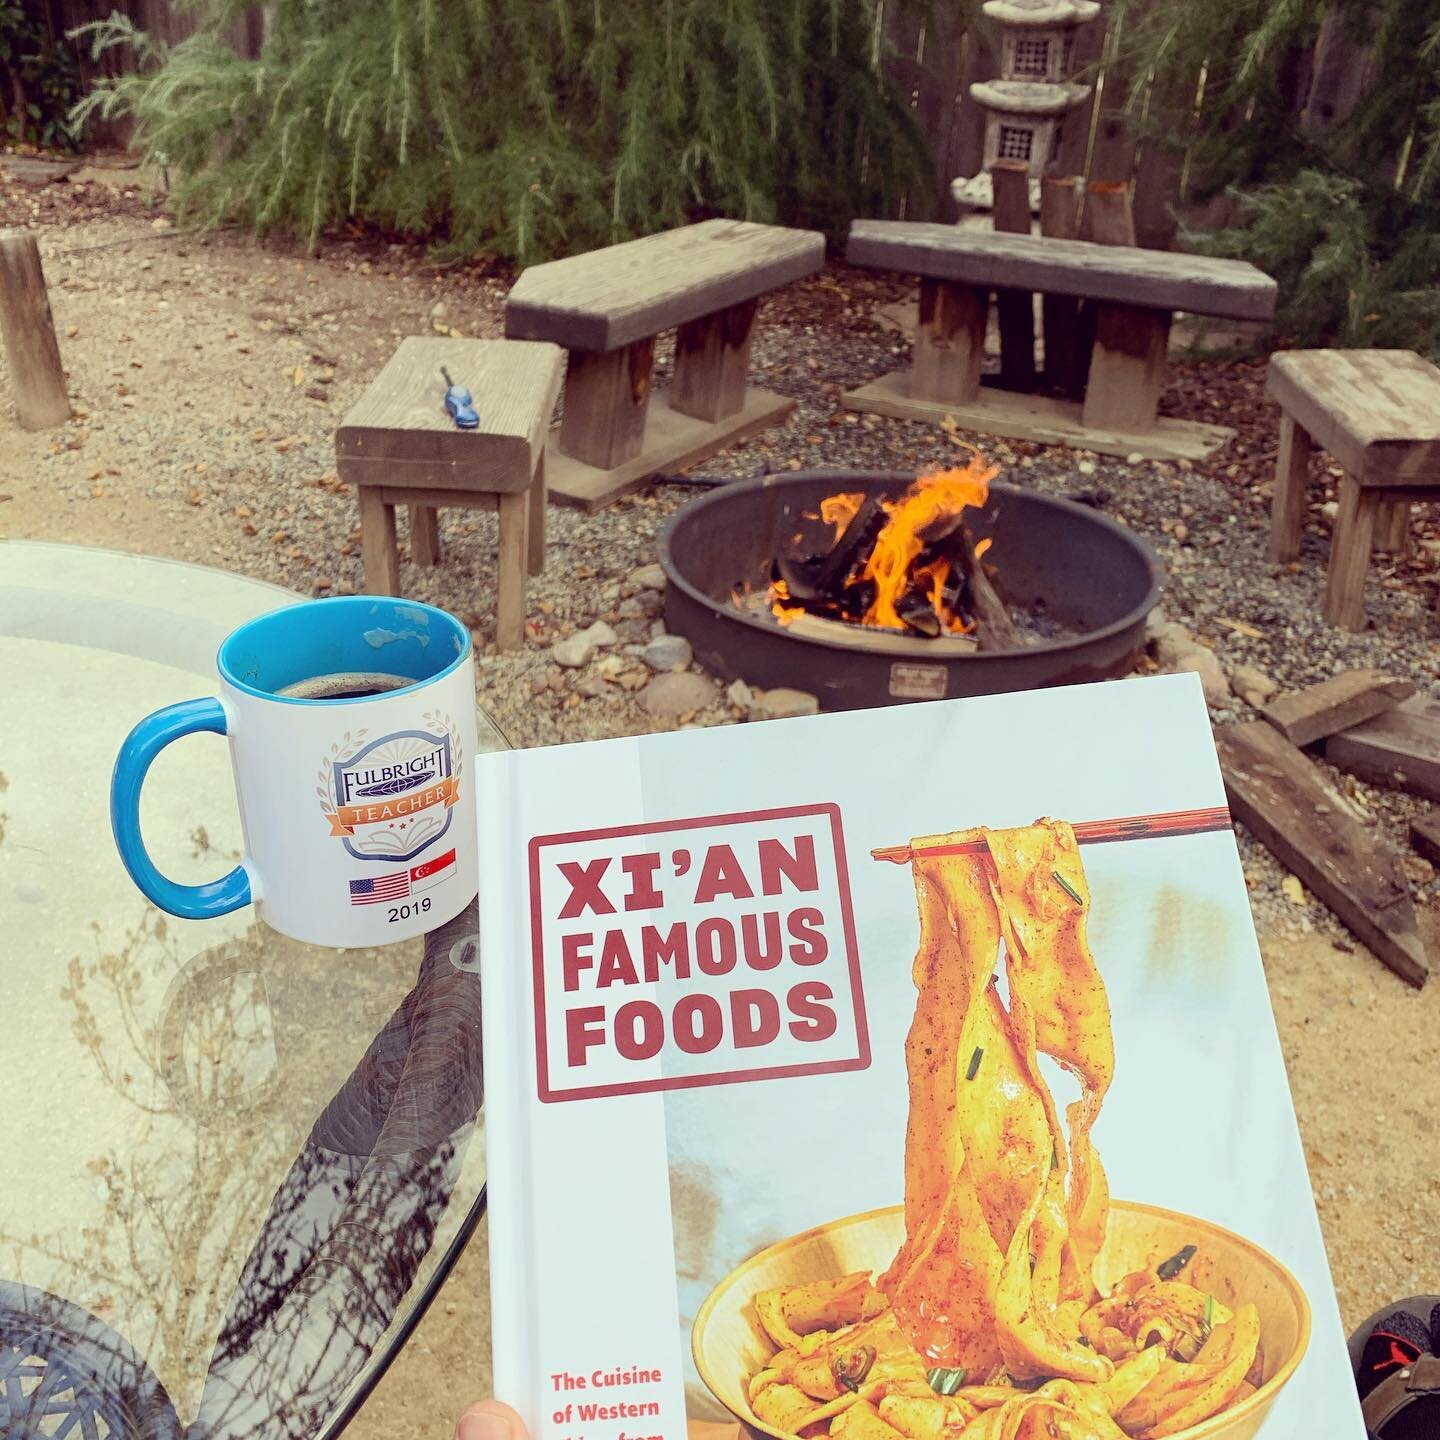 Perfect afternoon to explore my new cookbook.